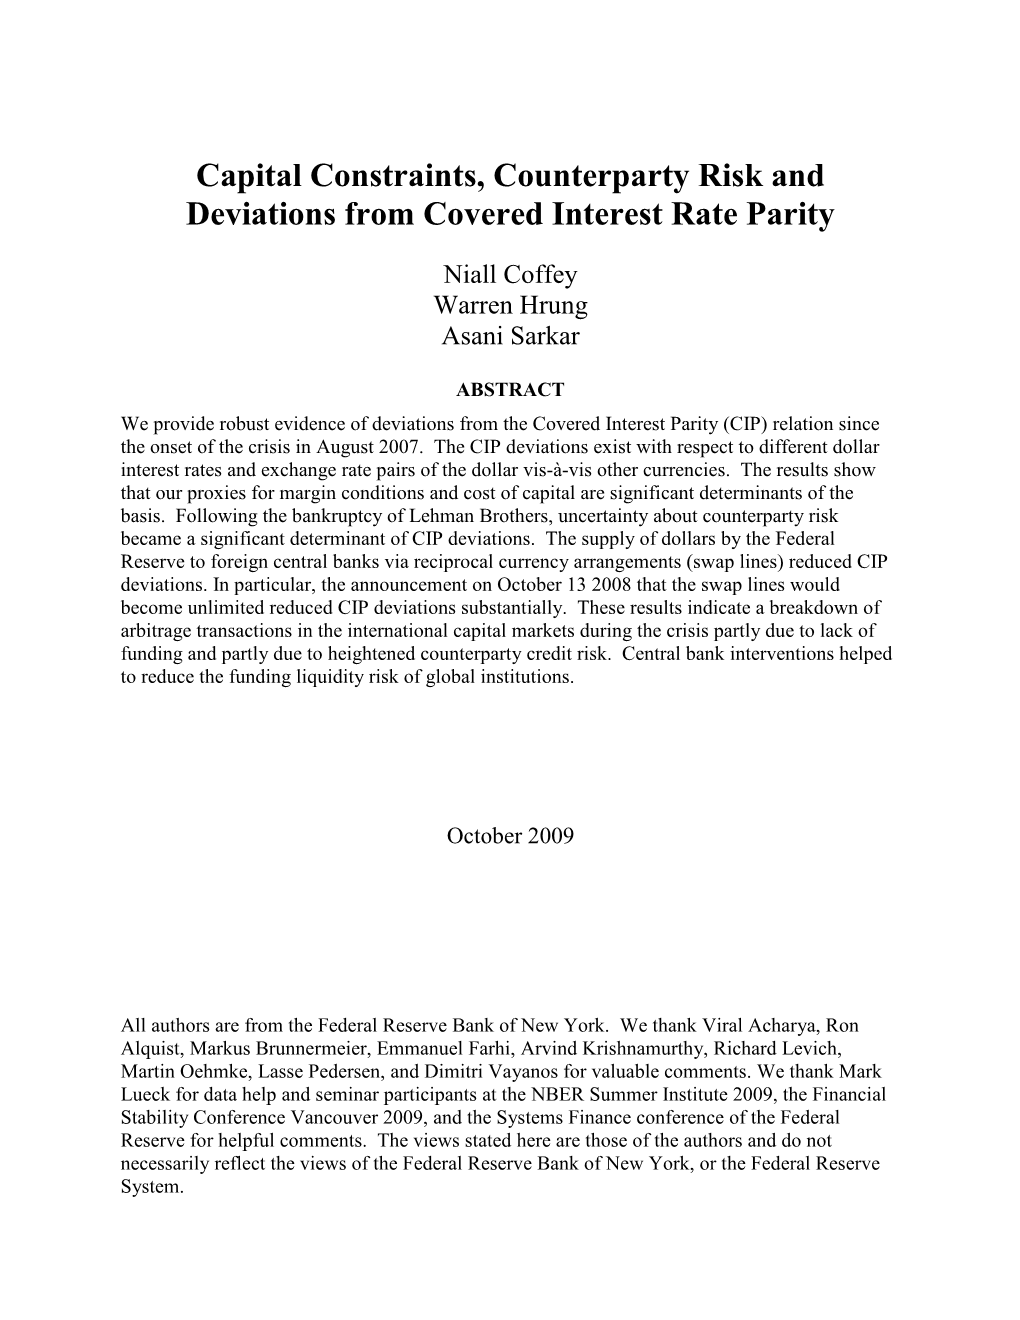 Capital Constraints, Counterparty Risk and Deviations from Covered Interest Rate Parity